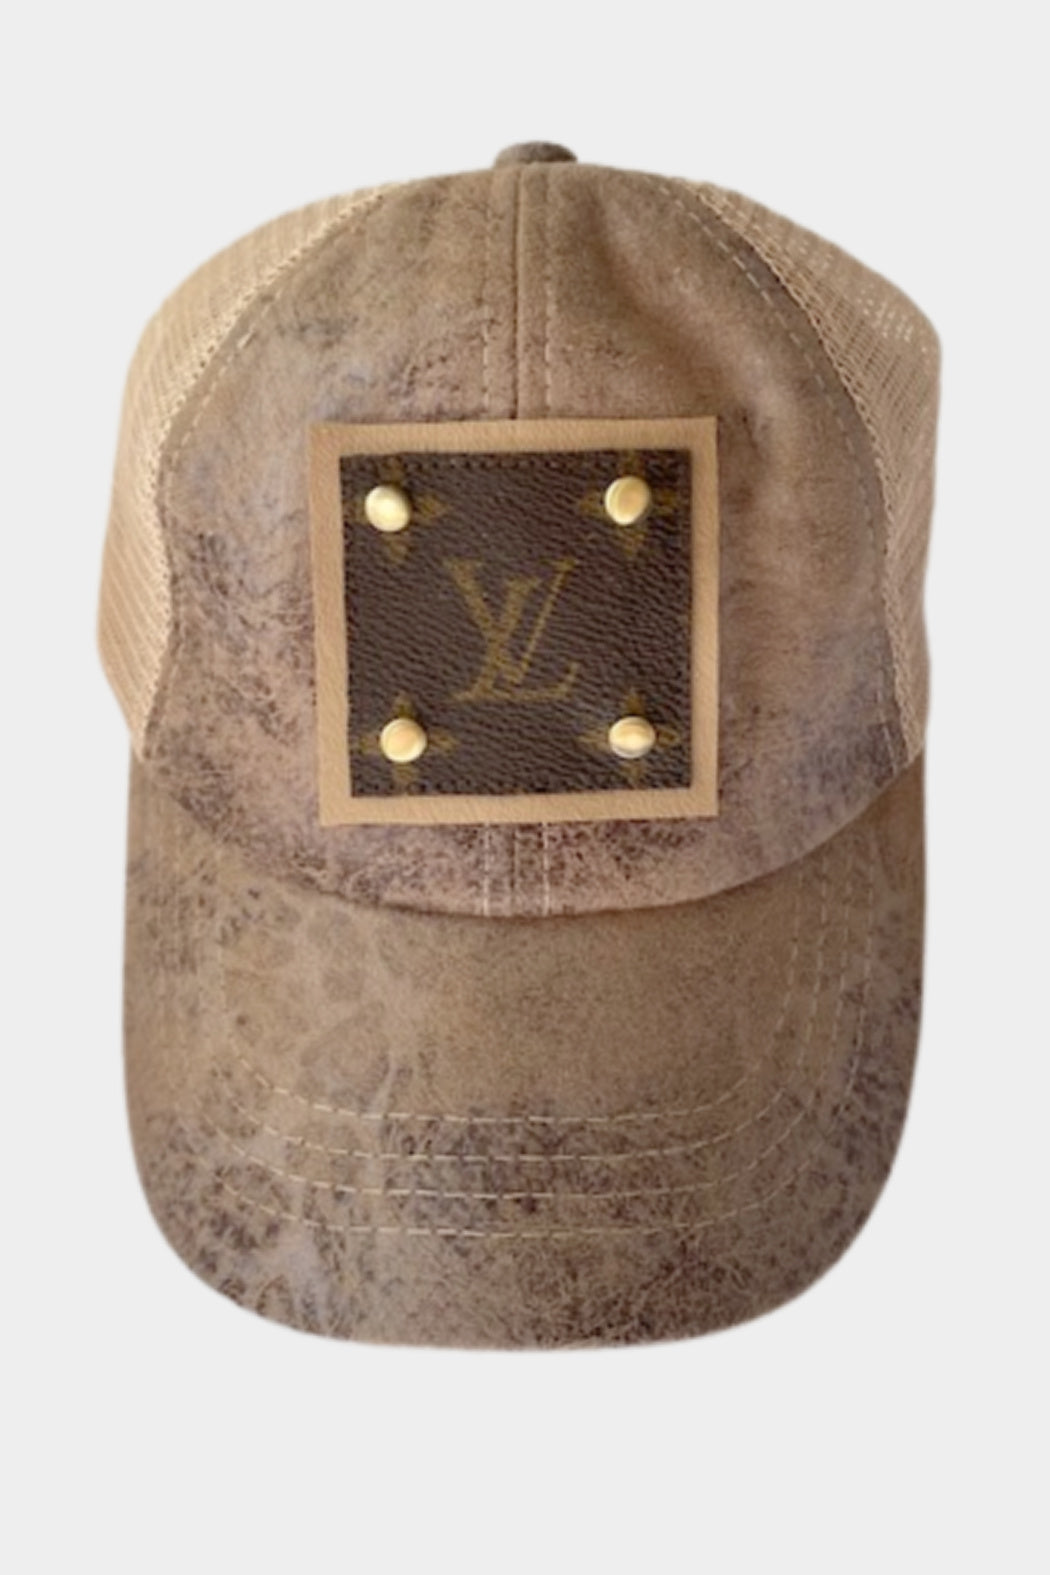 Up-Cycled Textured Suede Baseball Cap - Embellish Your Life 